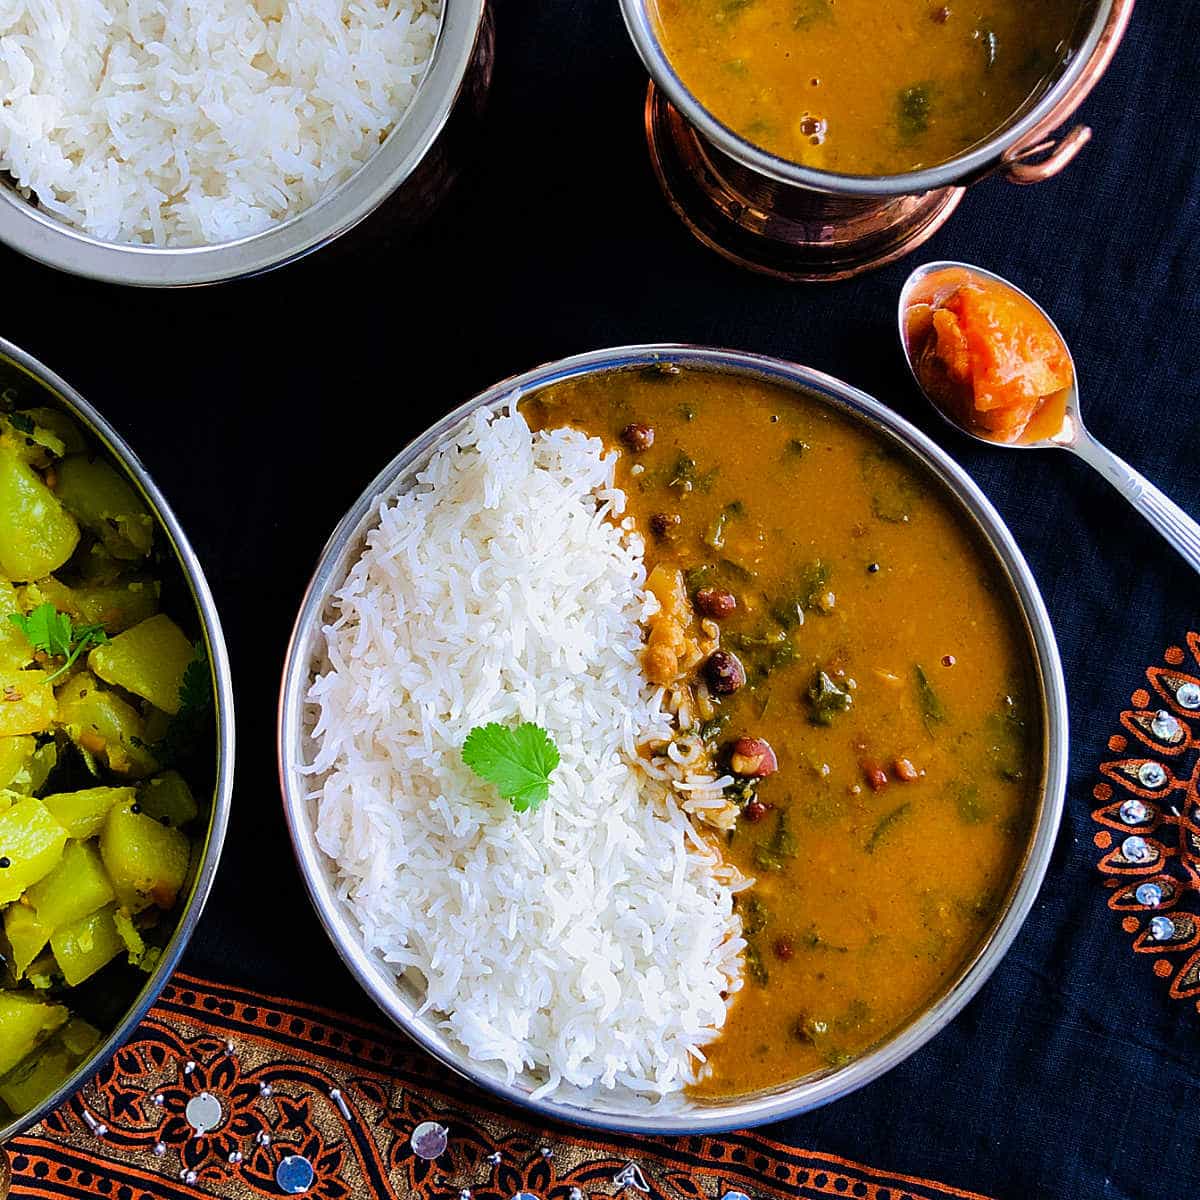 Palak sambar served with rice on a steel plate.